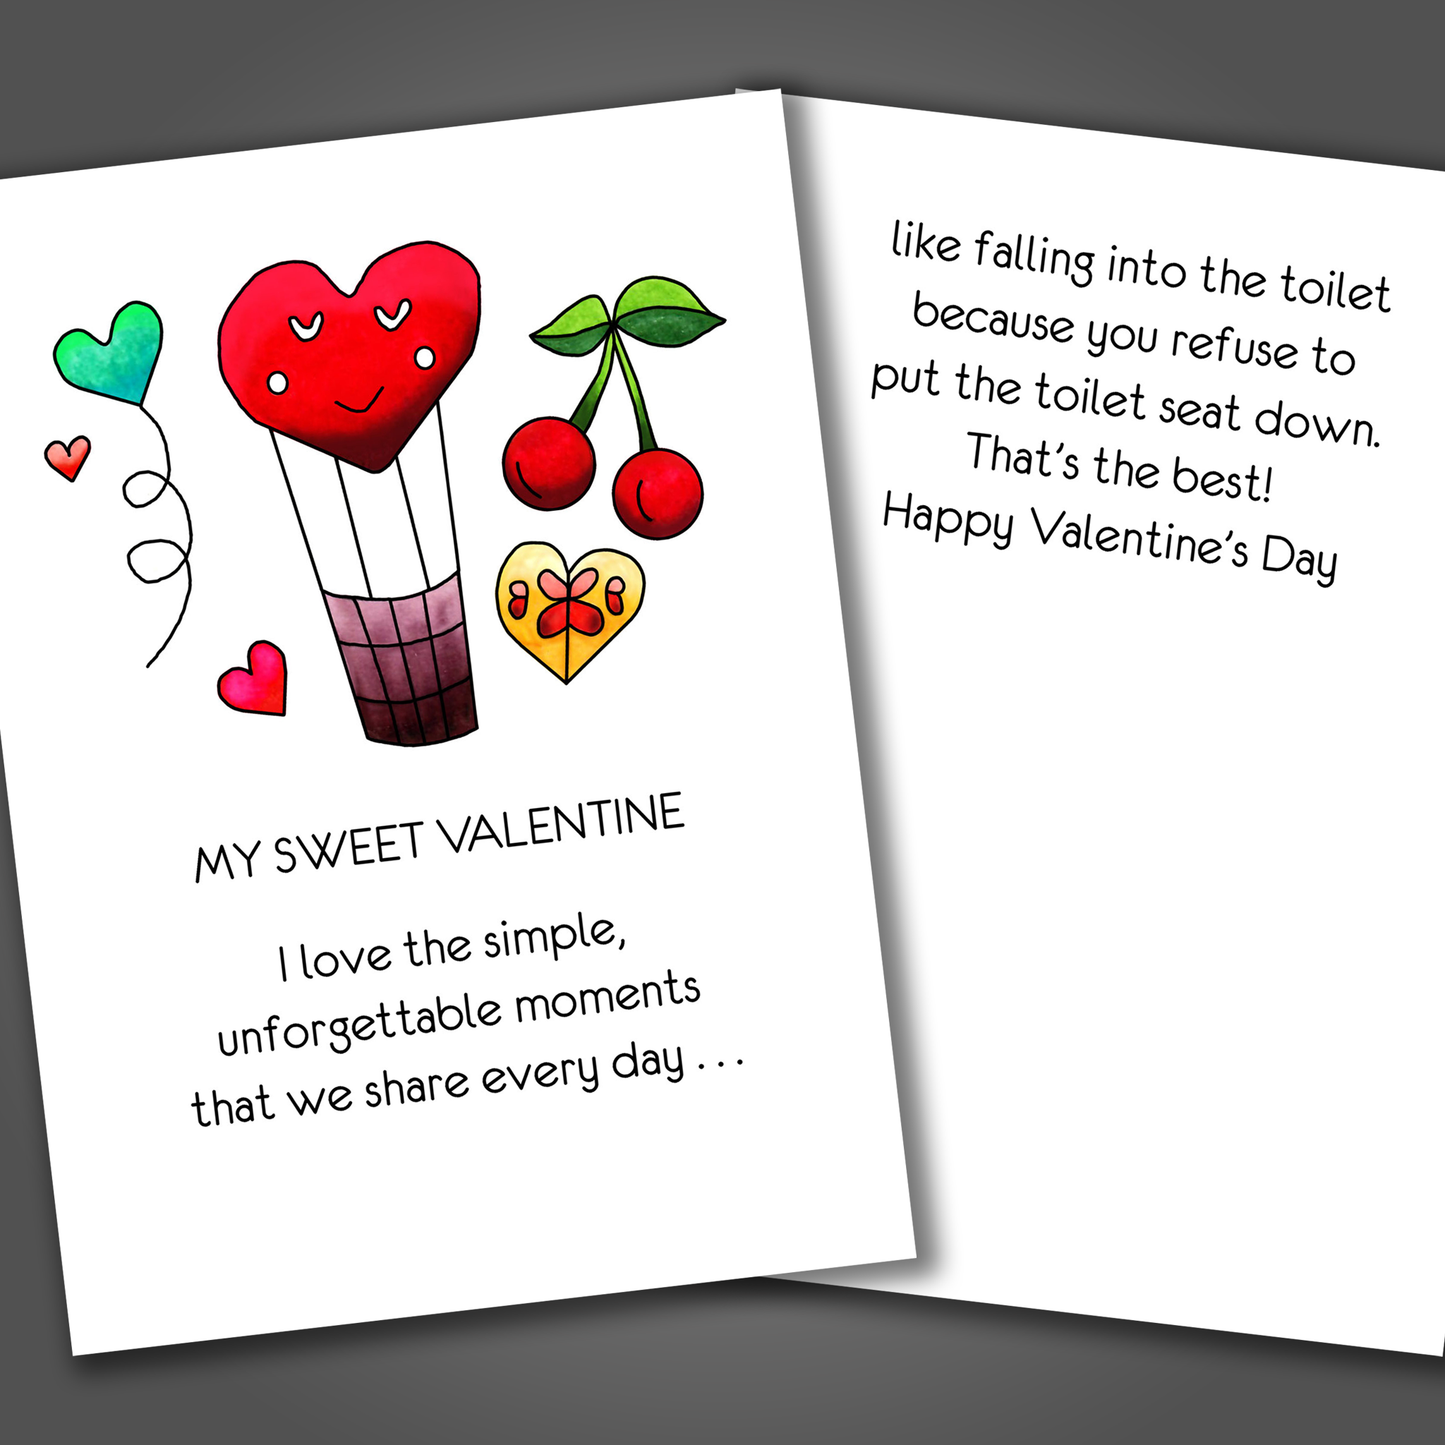 Funny Valentine's Day card with a multiple hearts and a balloon drawn on the front of the card. Inside the card is a funny joke that ends in Happy Valentine's Day!